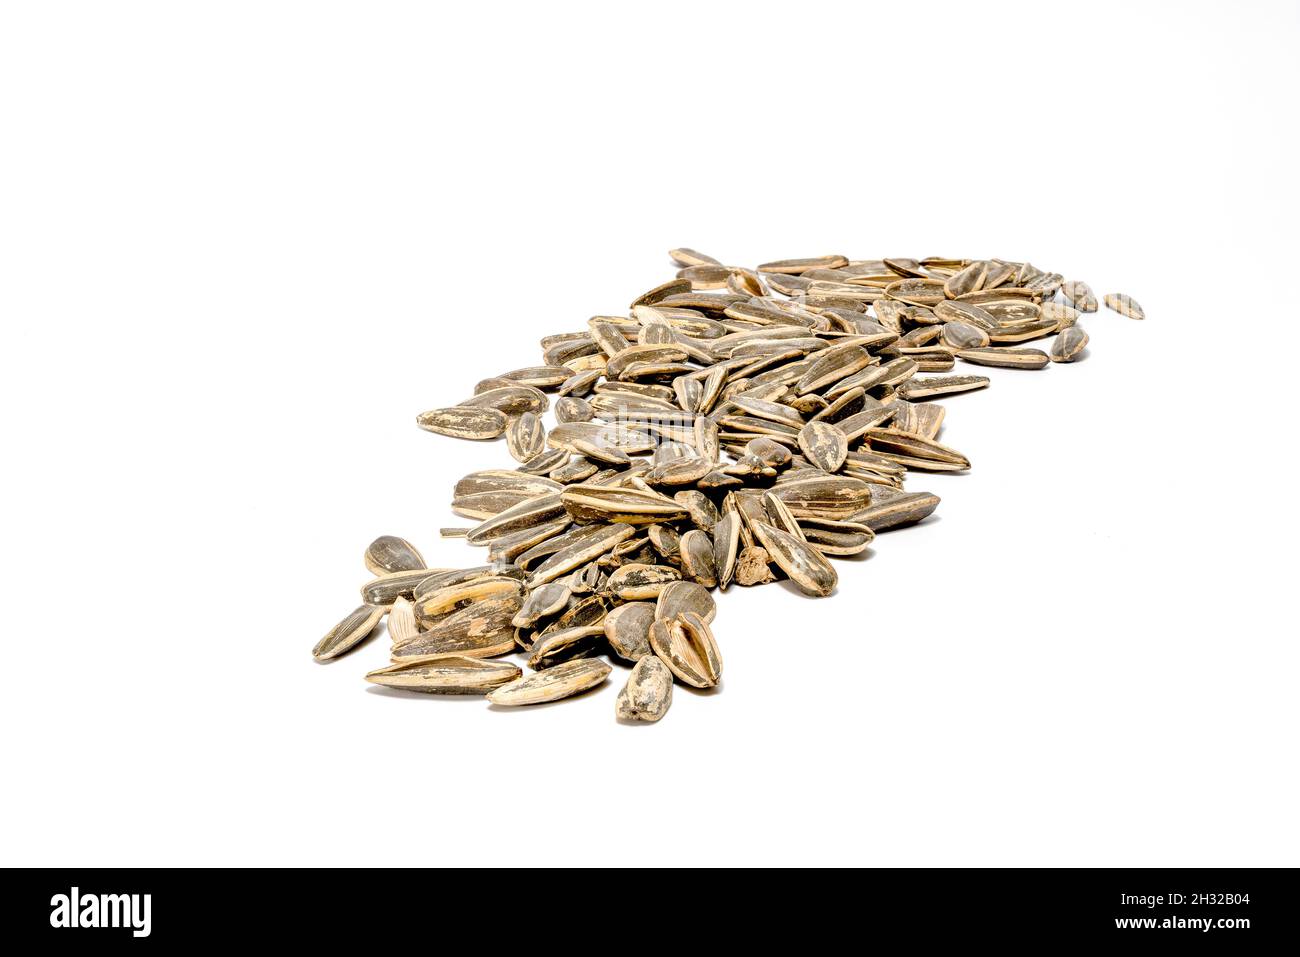 Heap of dry sunflower seeds. Isolated on a white background. Stock Photo